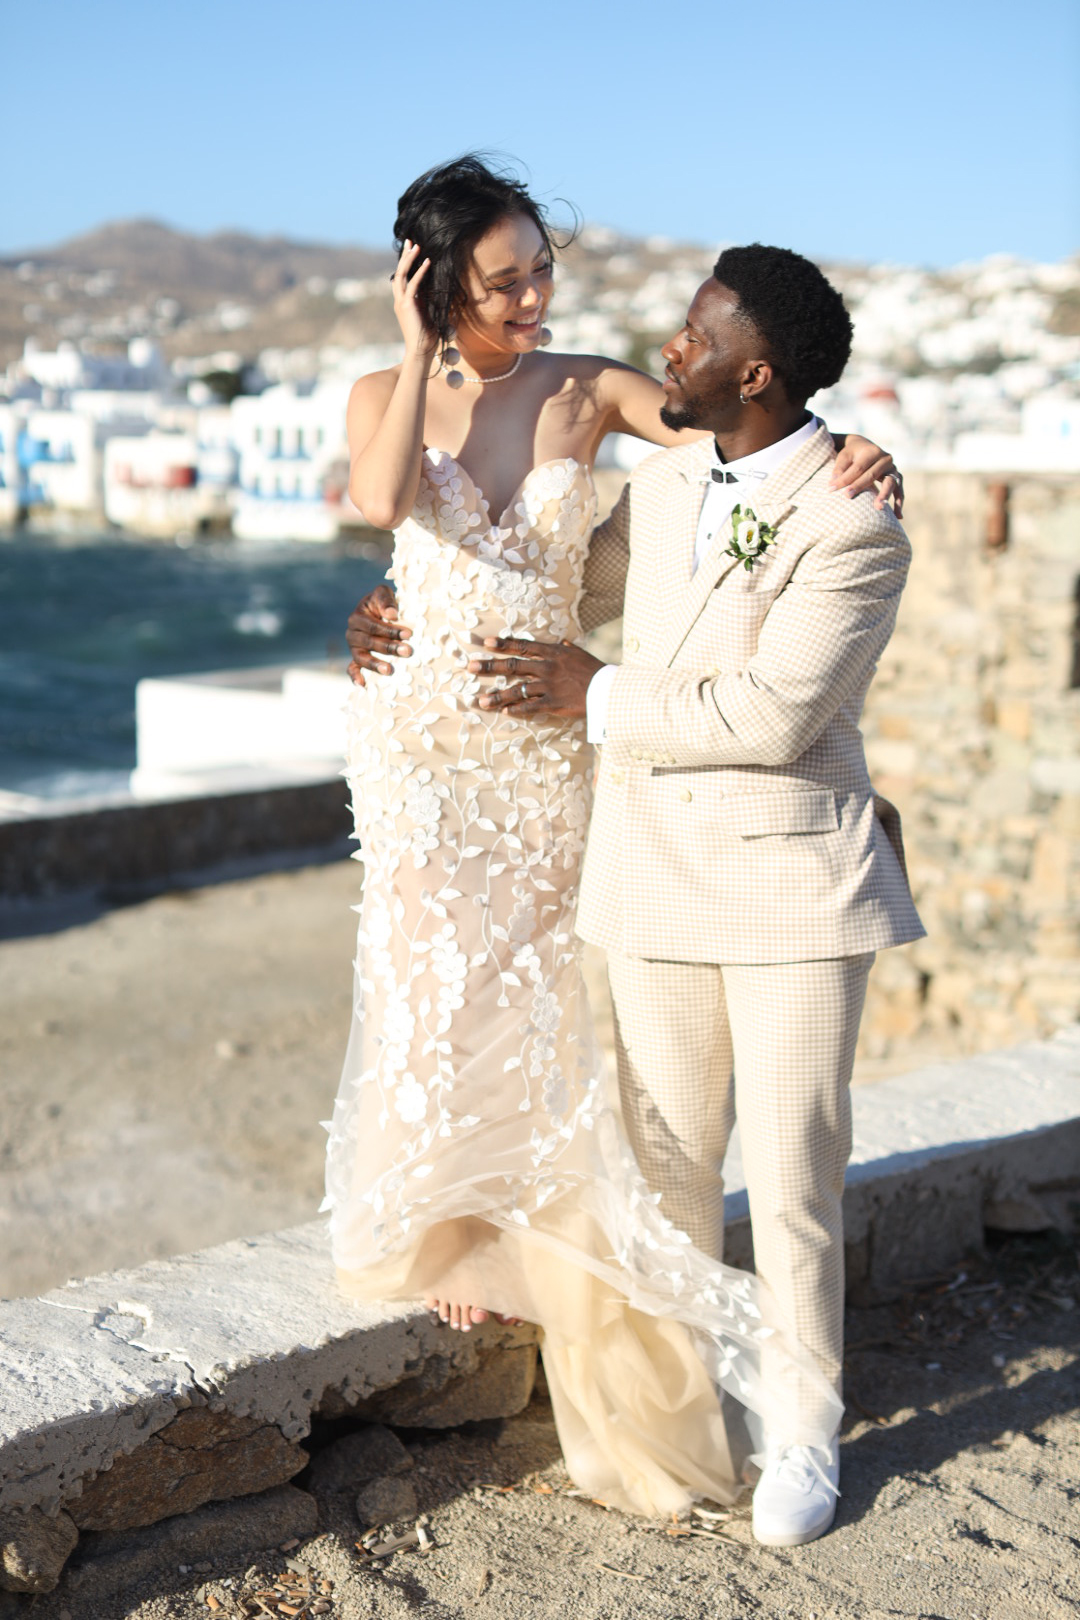 Lexington High School sweethearts Julie Le and Jarvis Denny’s dreams came true when they were married in Mykonos, Greece. From the villa where the ceremony and reception were held, family and friends enjoyed magical views of the Aegean Sea with sunrises and sunsets over the Mediterranean. Julie’s mom, Minh Le, a fashion designer in Lexington, designed three spectacular gowns for the event. Their first dance was to Elvis Presley’s Can’t Help Falling in Love.
Photography courtesy of Minh Le
